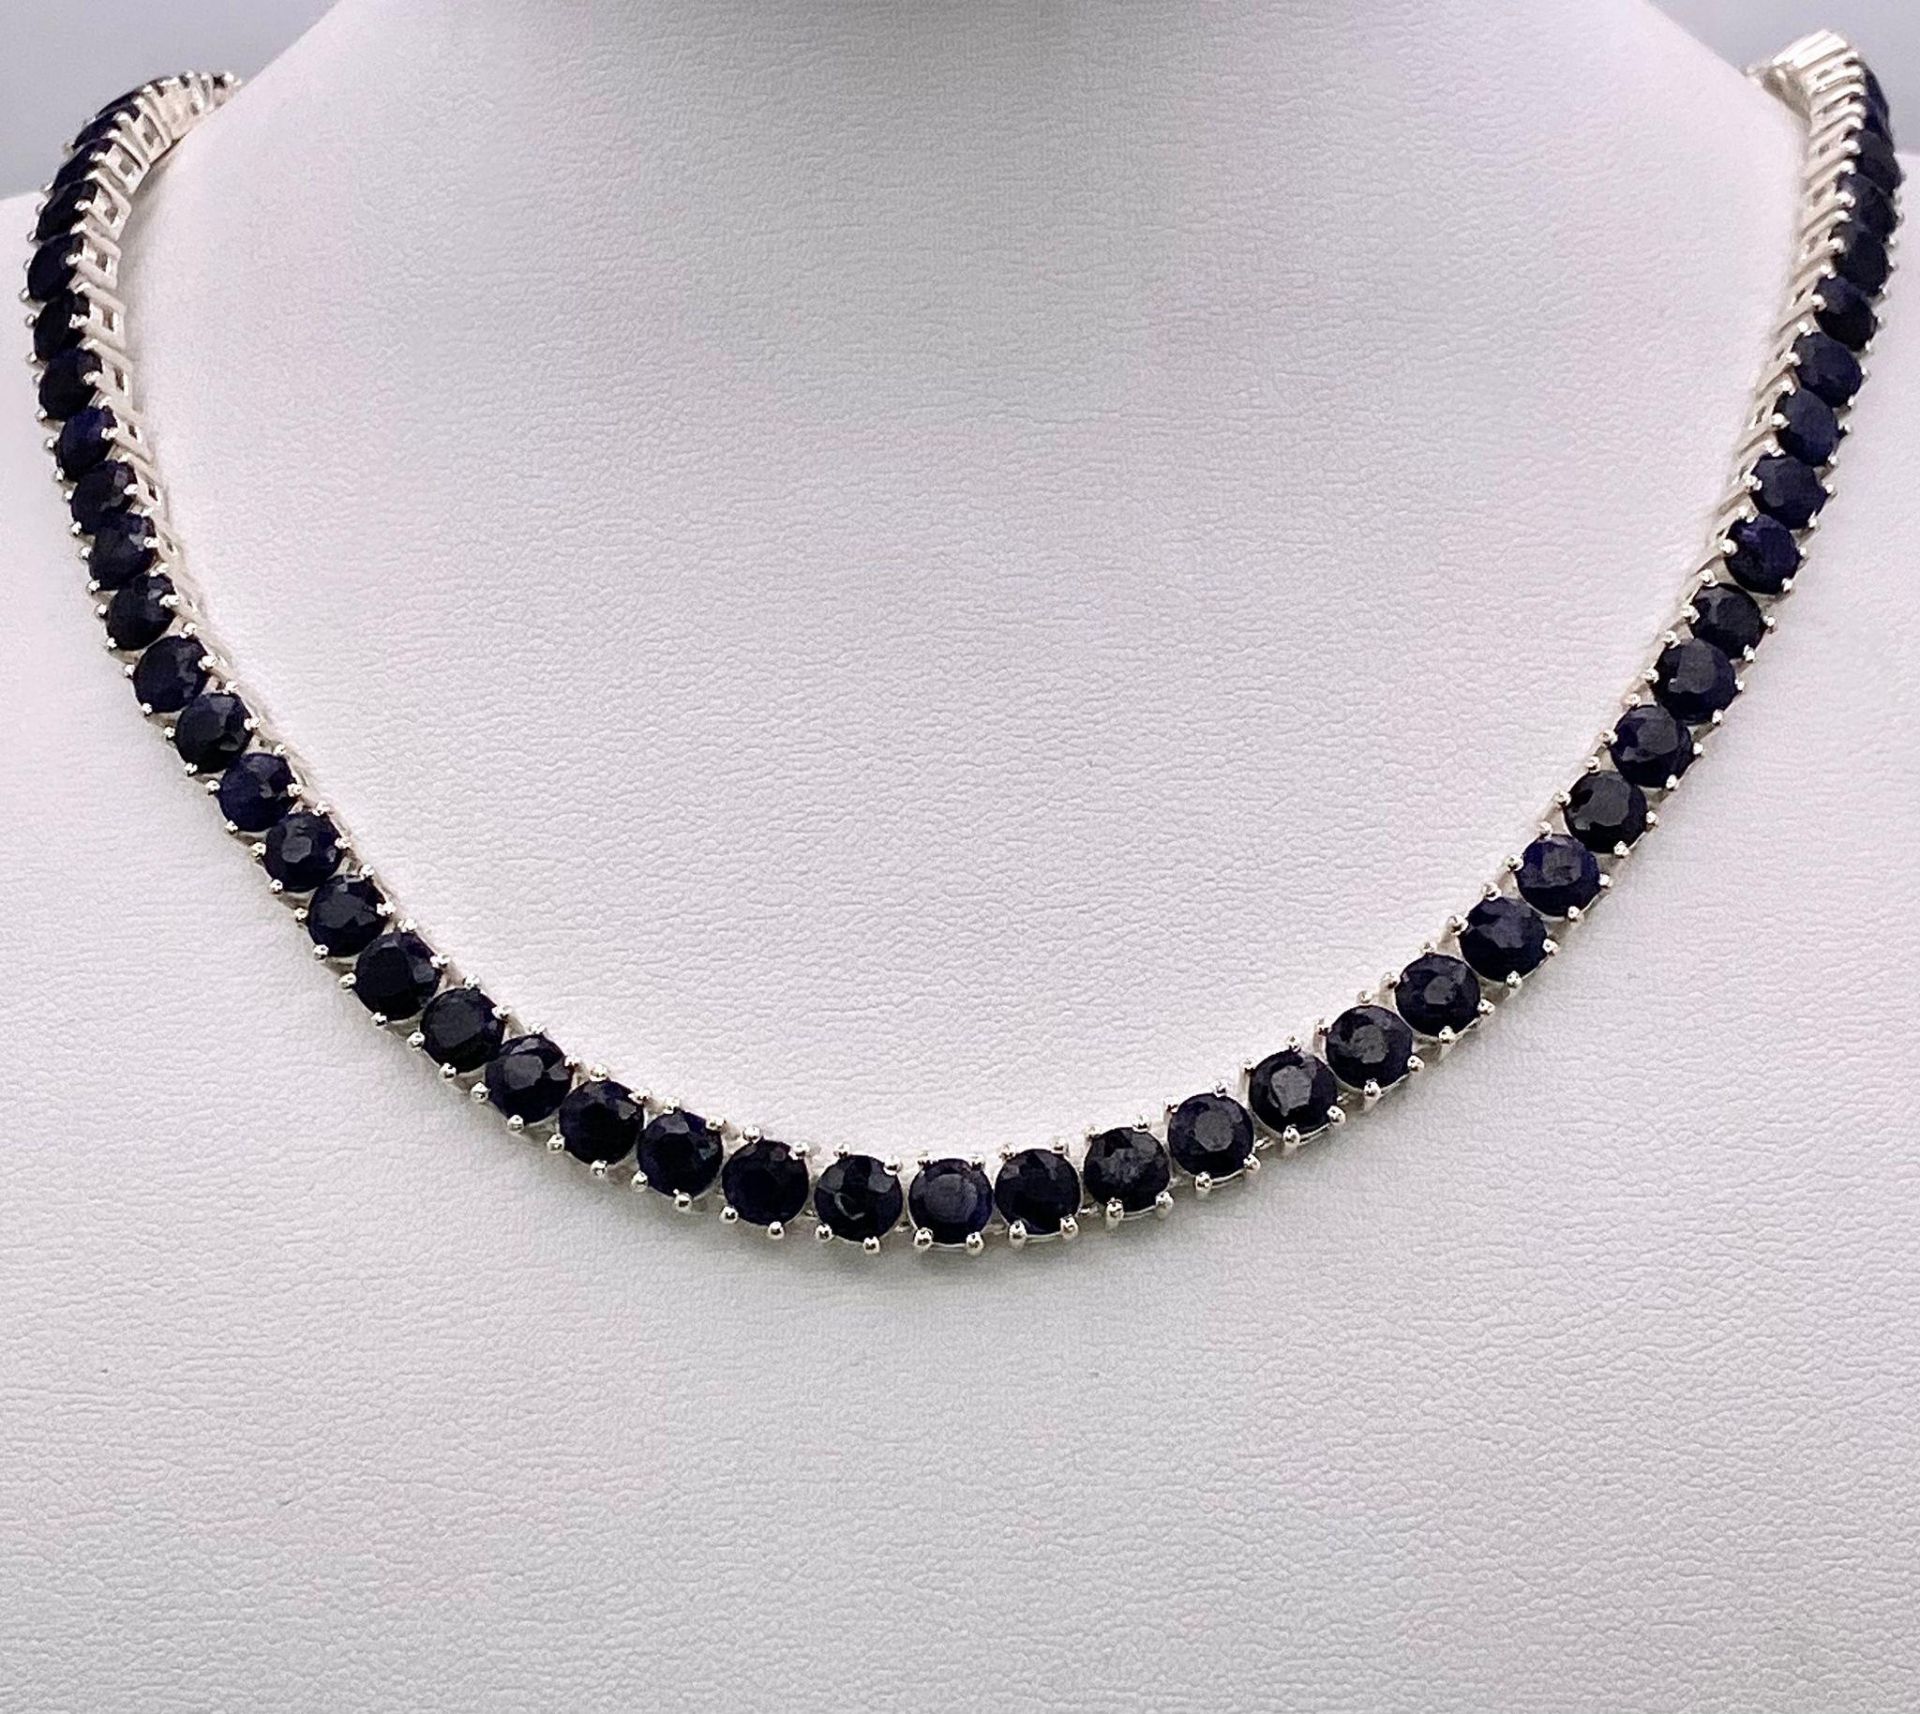 A Blue Sapphire Gemstone Tennis Necklace set in 925 Silver. 45cm length. 40.15g total weight.